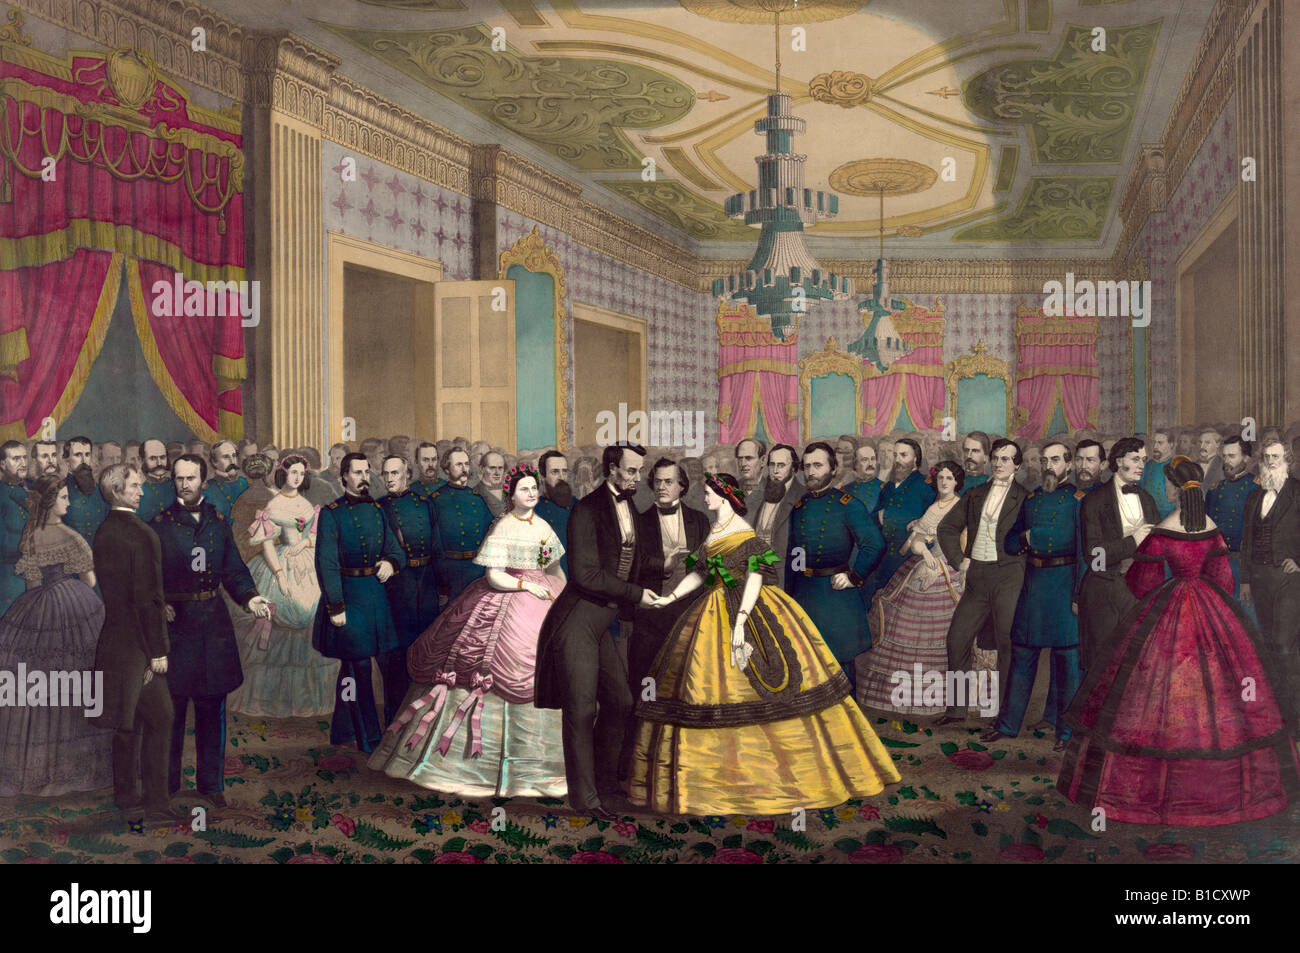 Abraham Lincoln & Mary Todd Lincoln greeting Union generals, Cabinet members, & others at a reception. Stock Photo